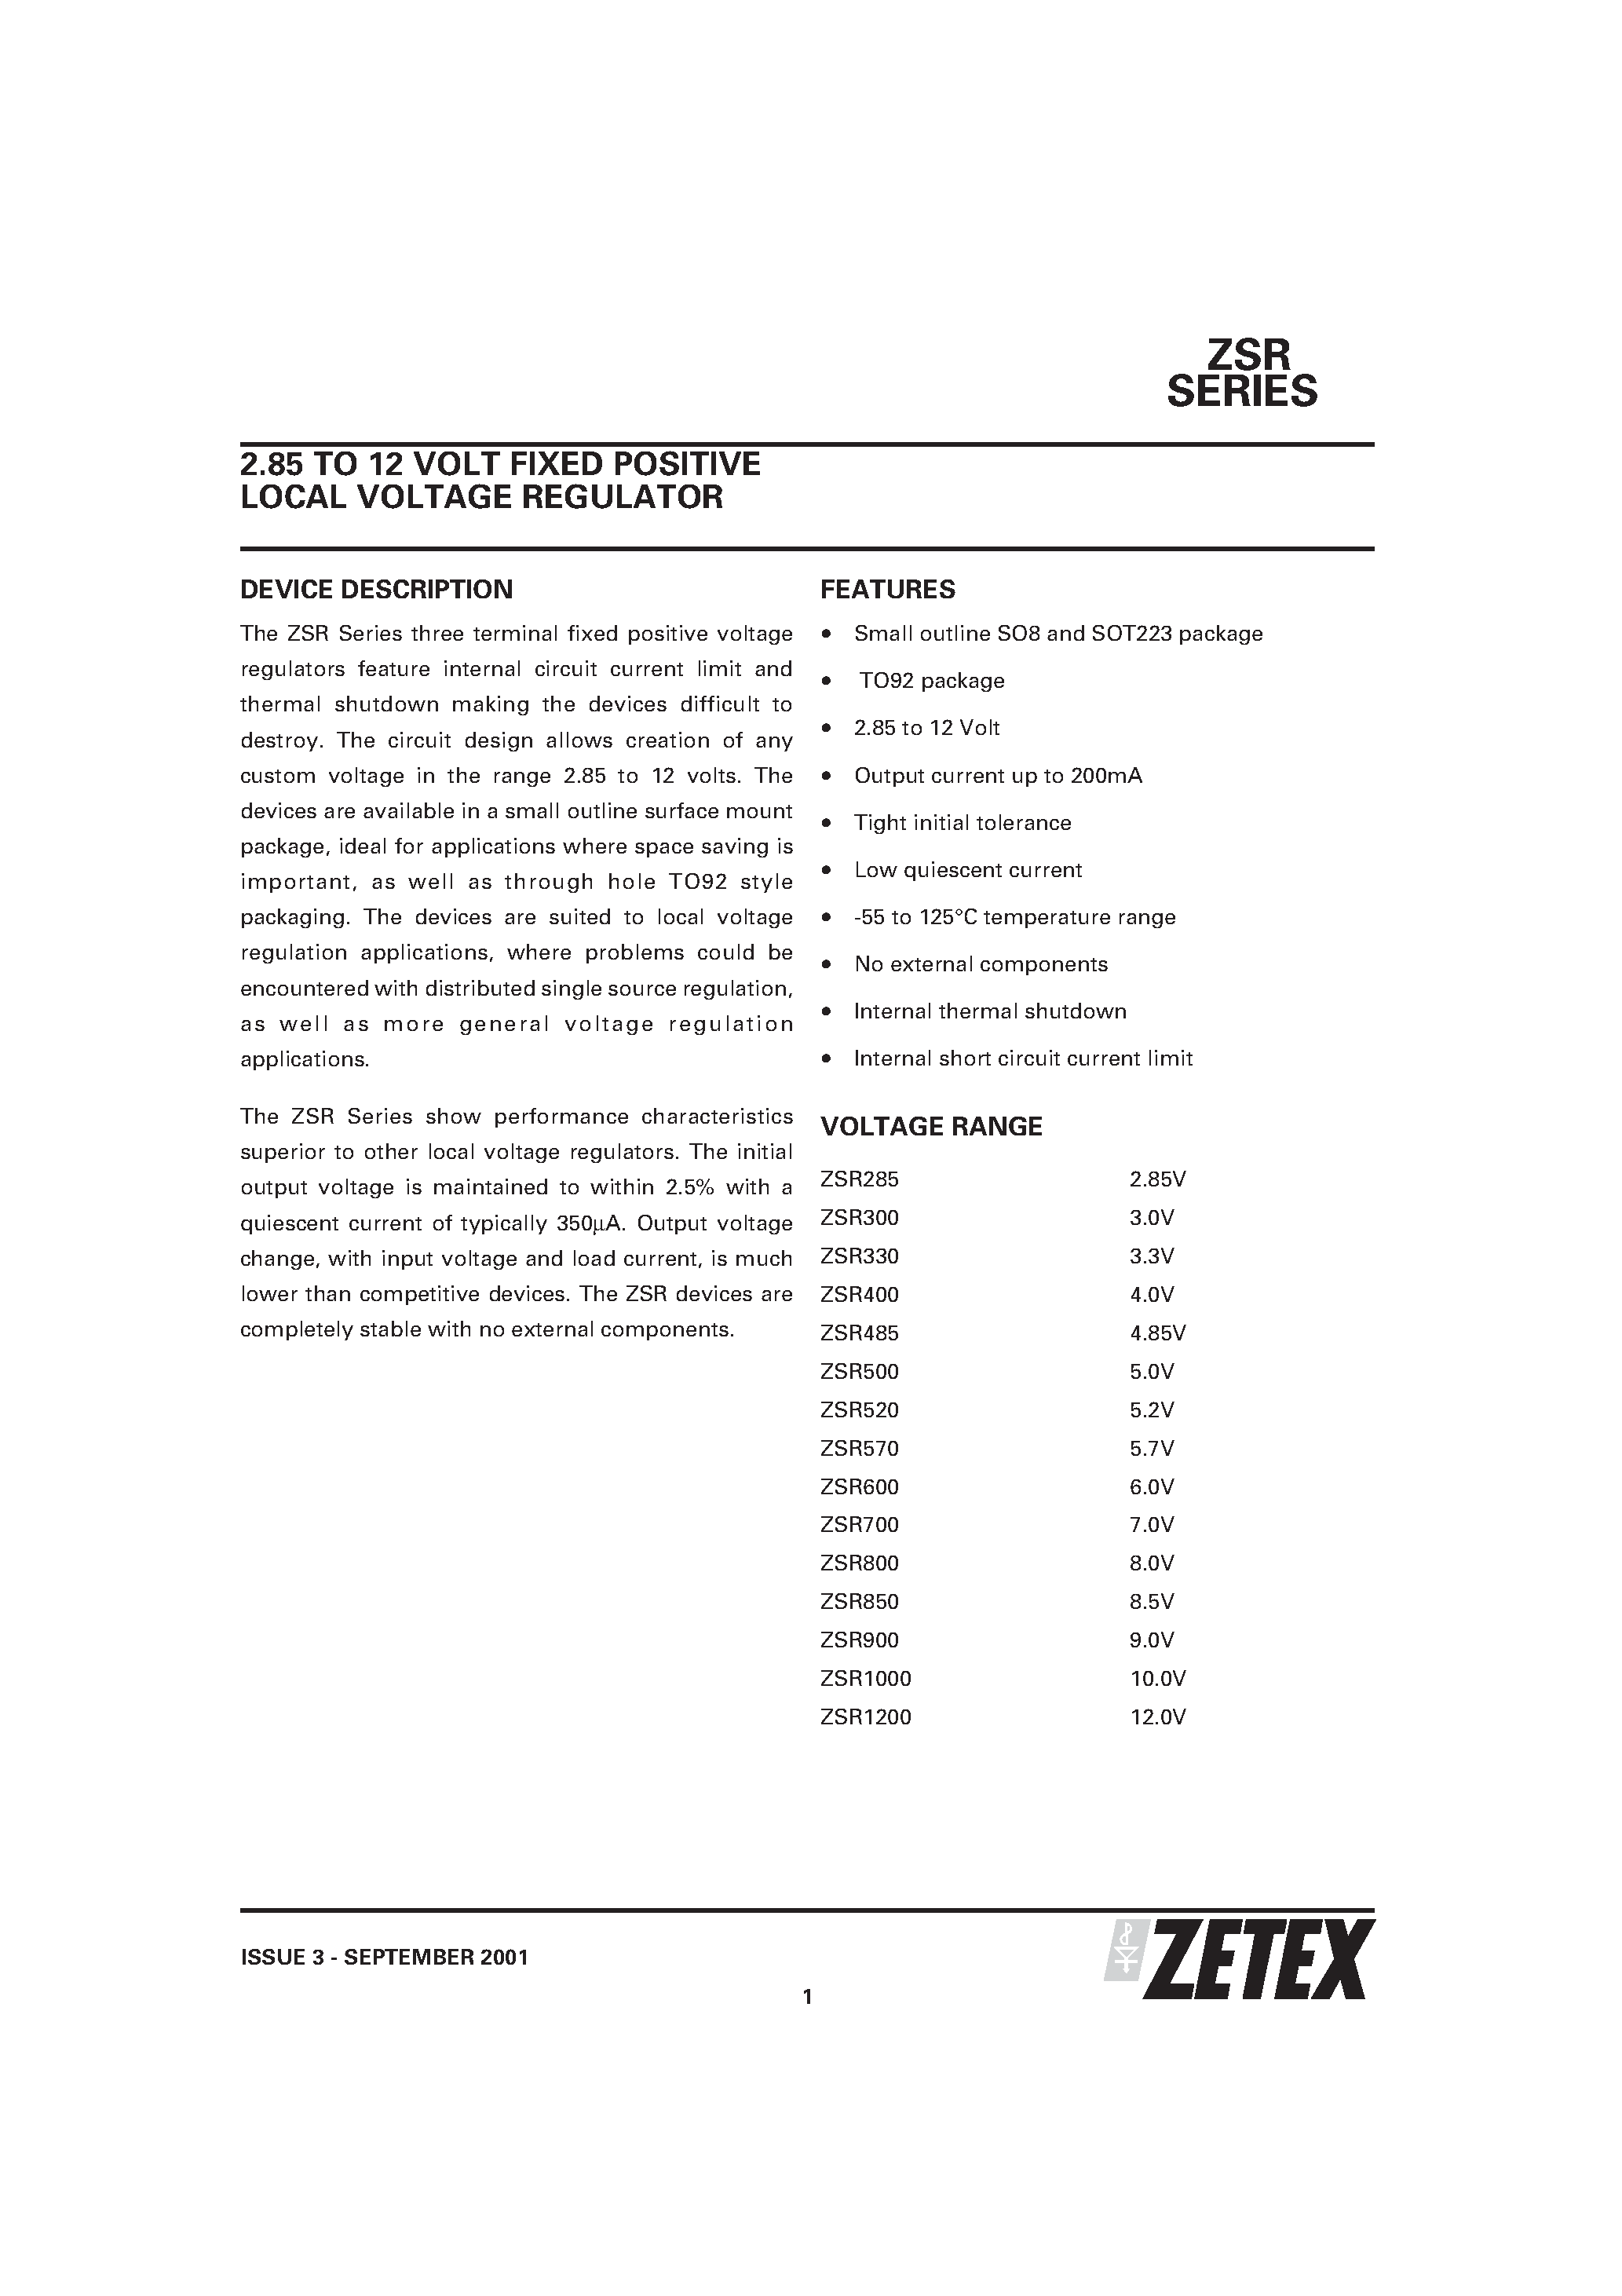 Datasheet ZSR570C - 2.85 TO 12 VOLT FIXED POSITIVE LOCAL VOLTAGE REGULATOR page 1